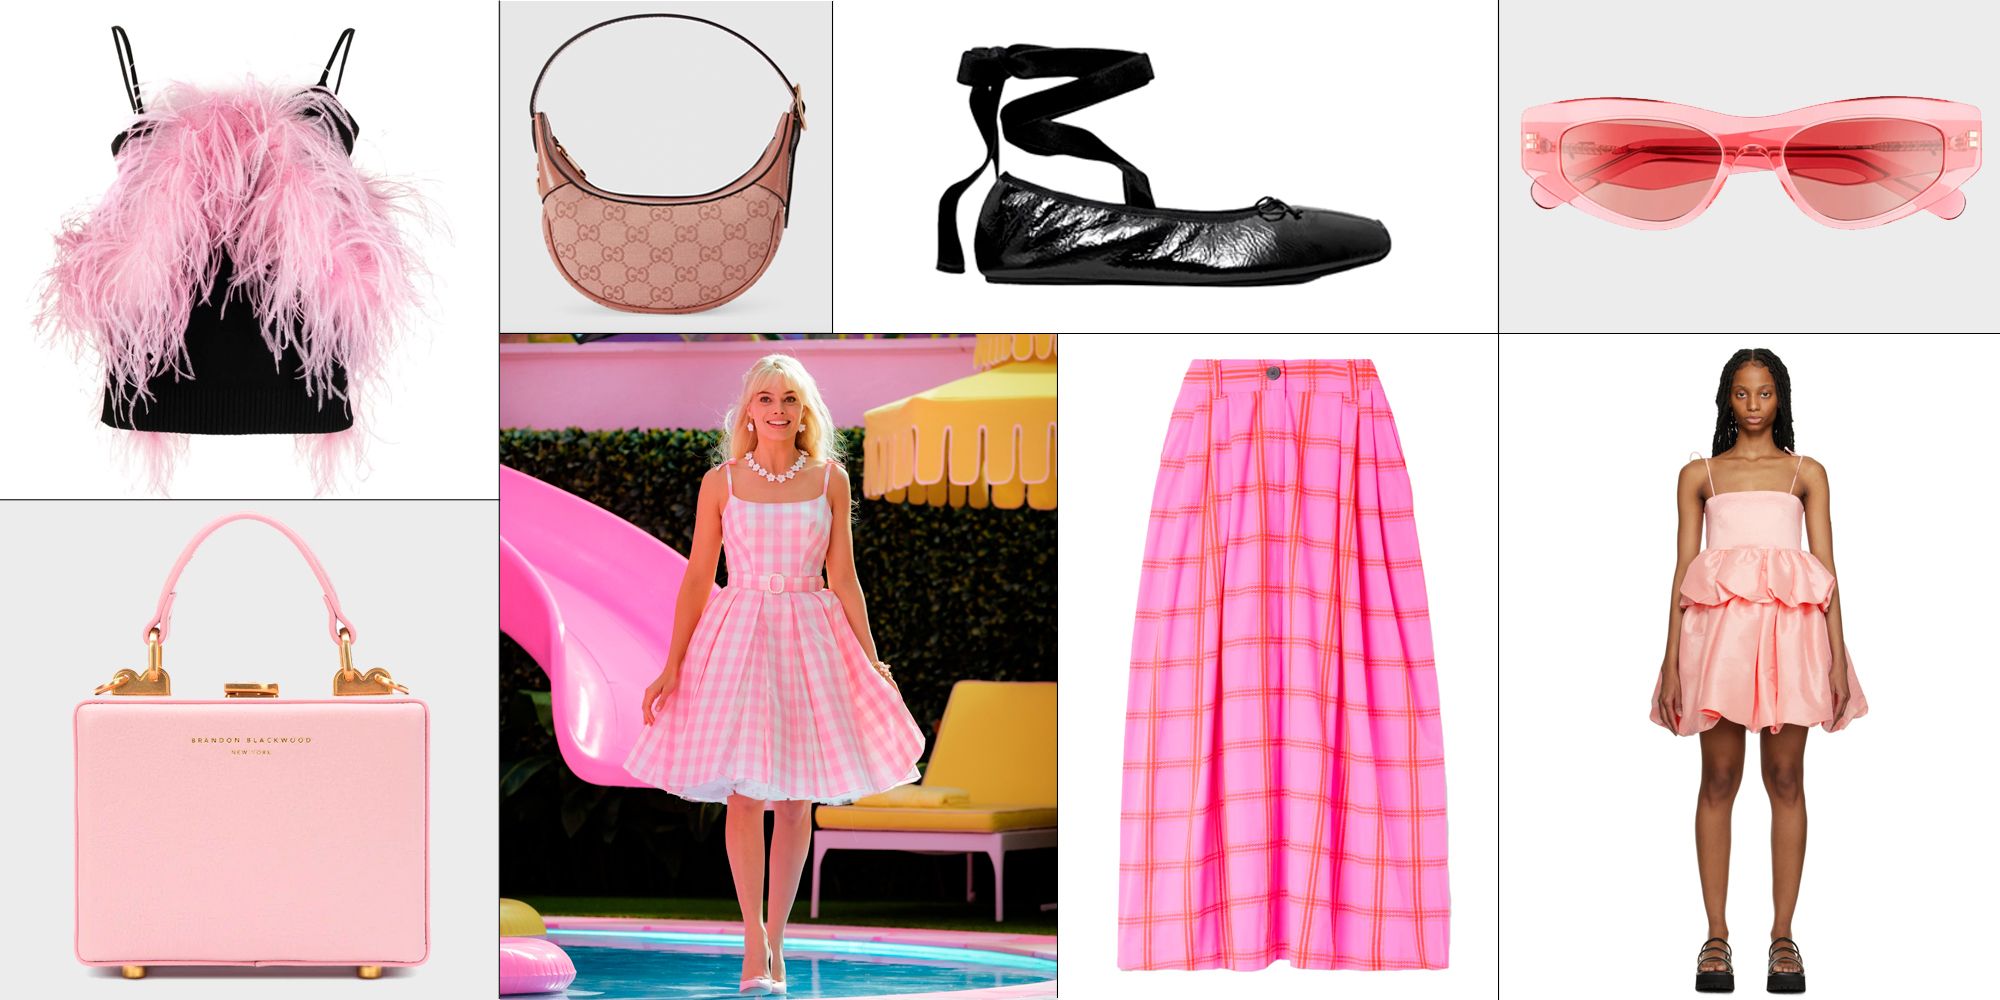 Barbie outfits: Everything you need to dress up for the cinema